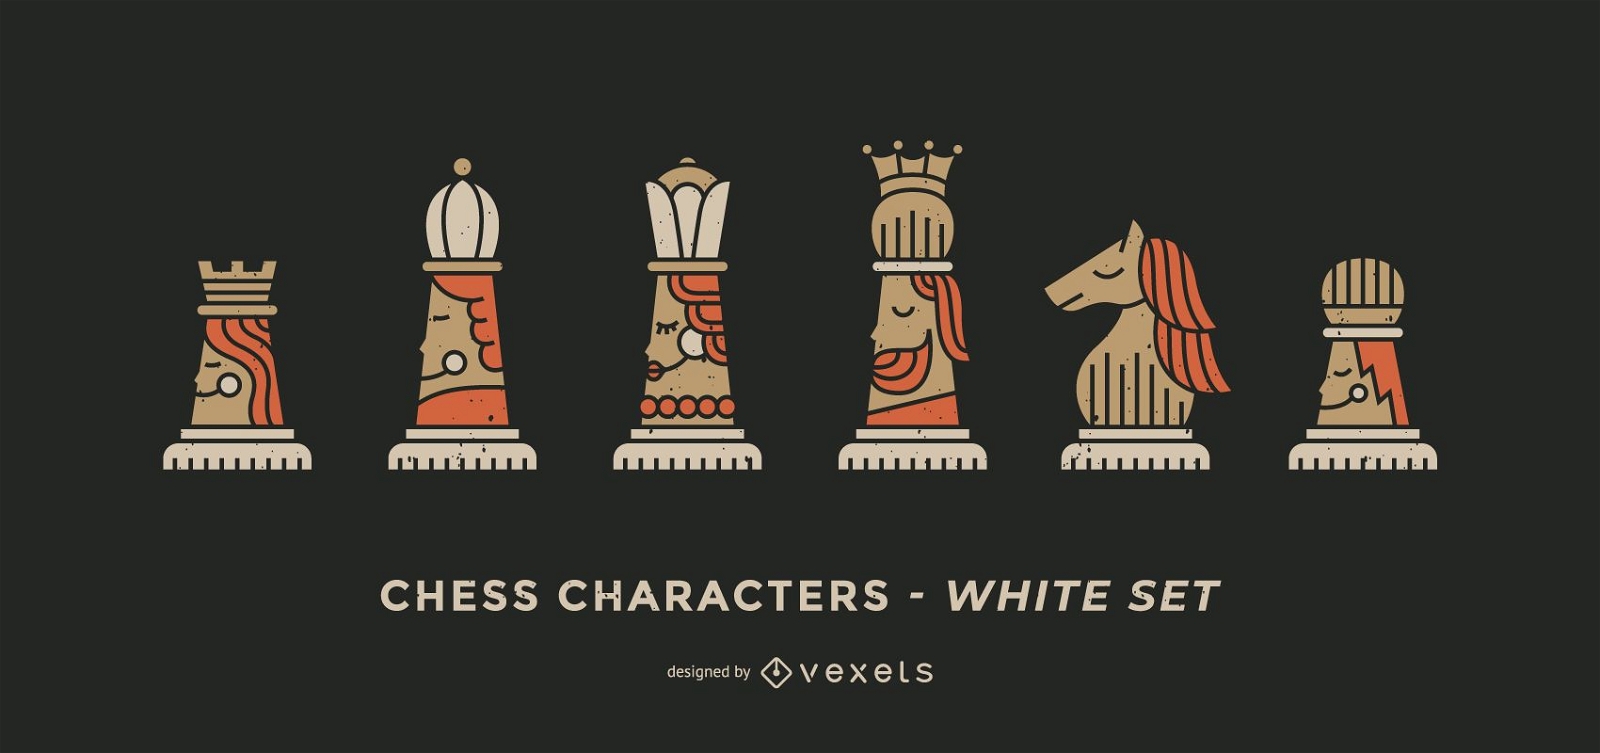 Chess characters white set